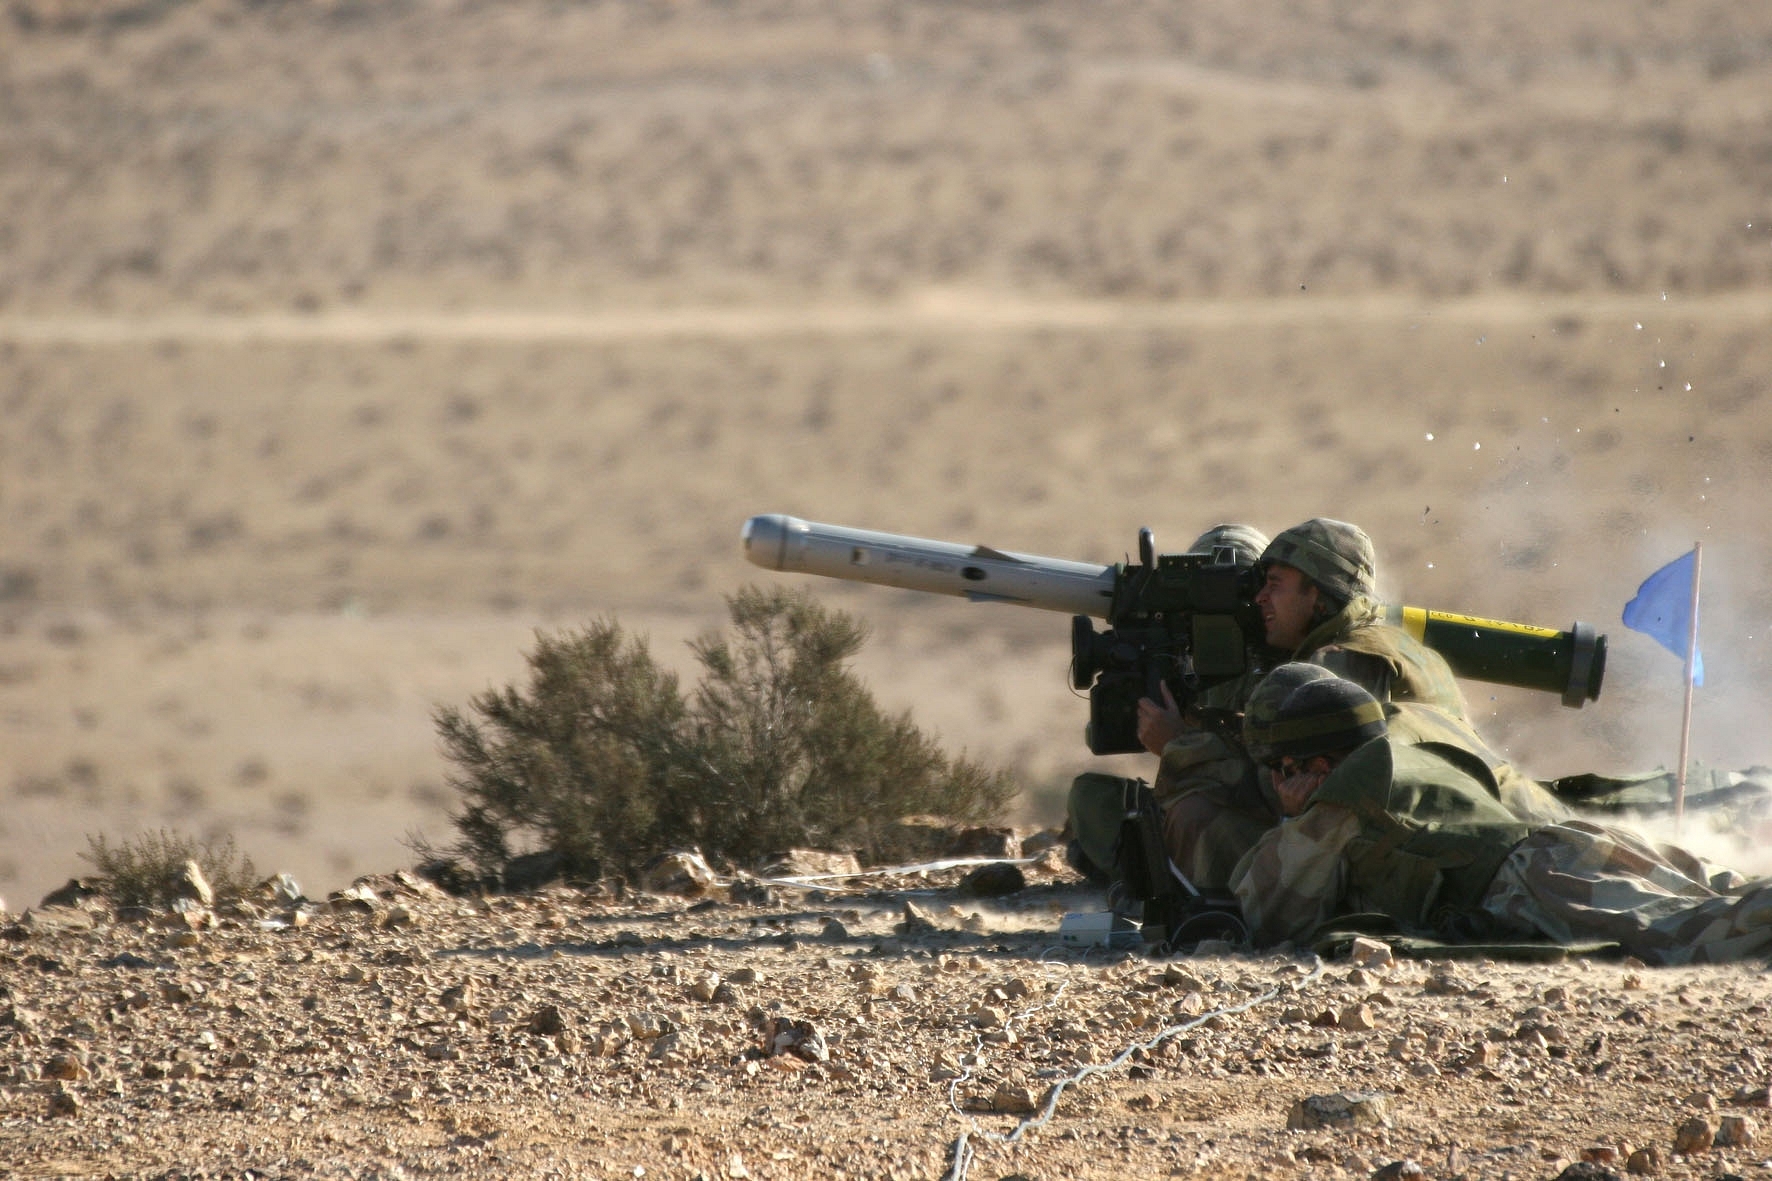 Israeli soldiers launch a Spike anti-tank guided missile during a training exercise. (Rafael Advanced Defense Systems)